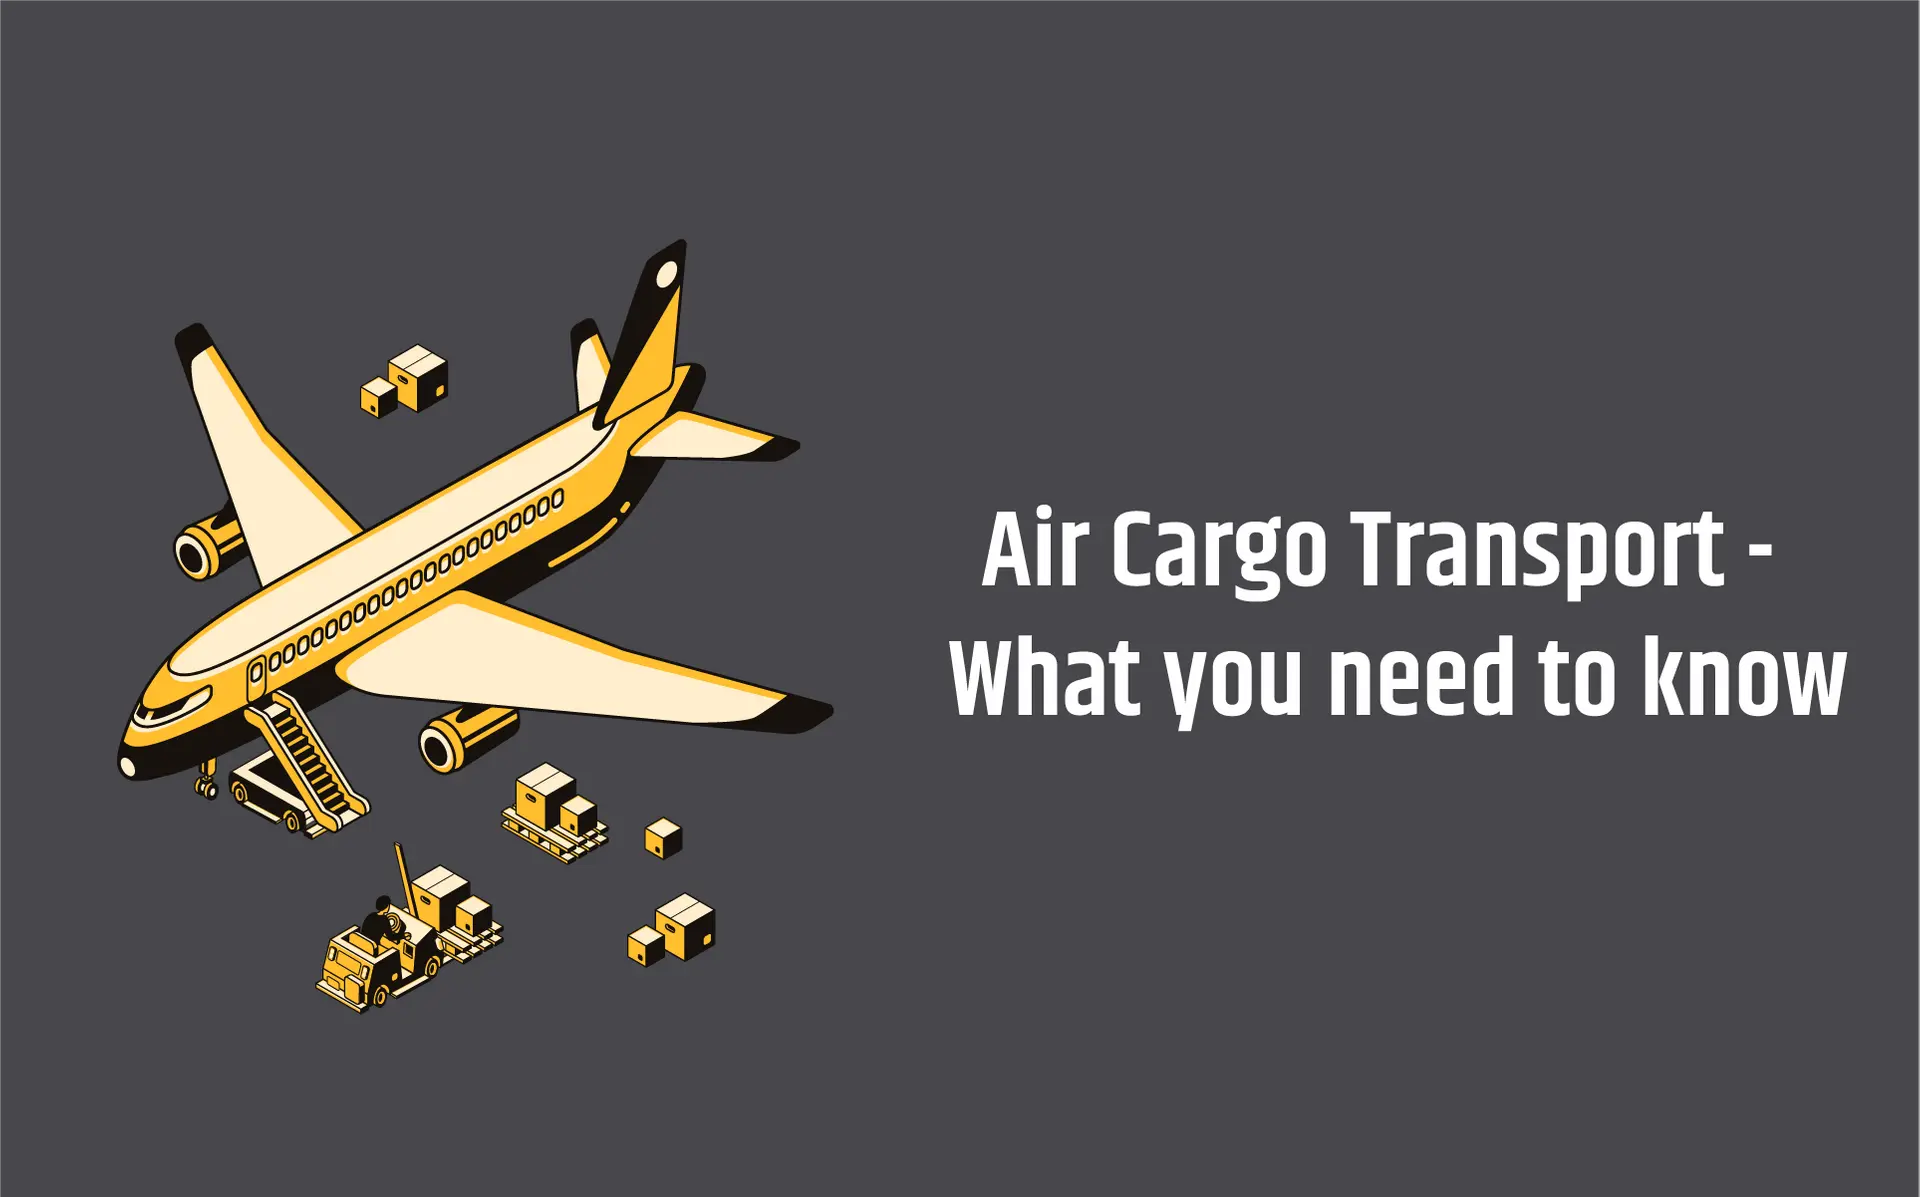 Everything You Need to Know About Air Cargo Transport